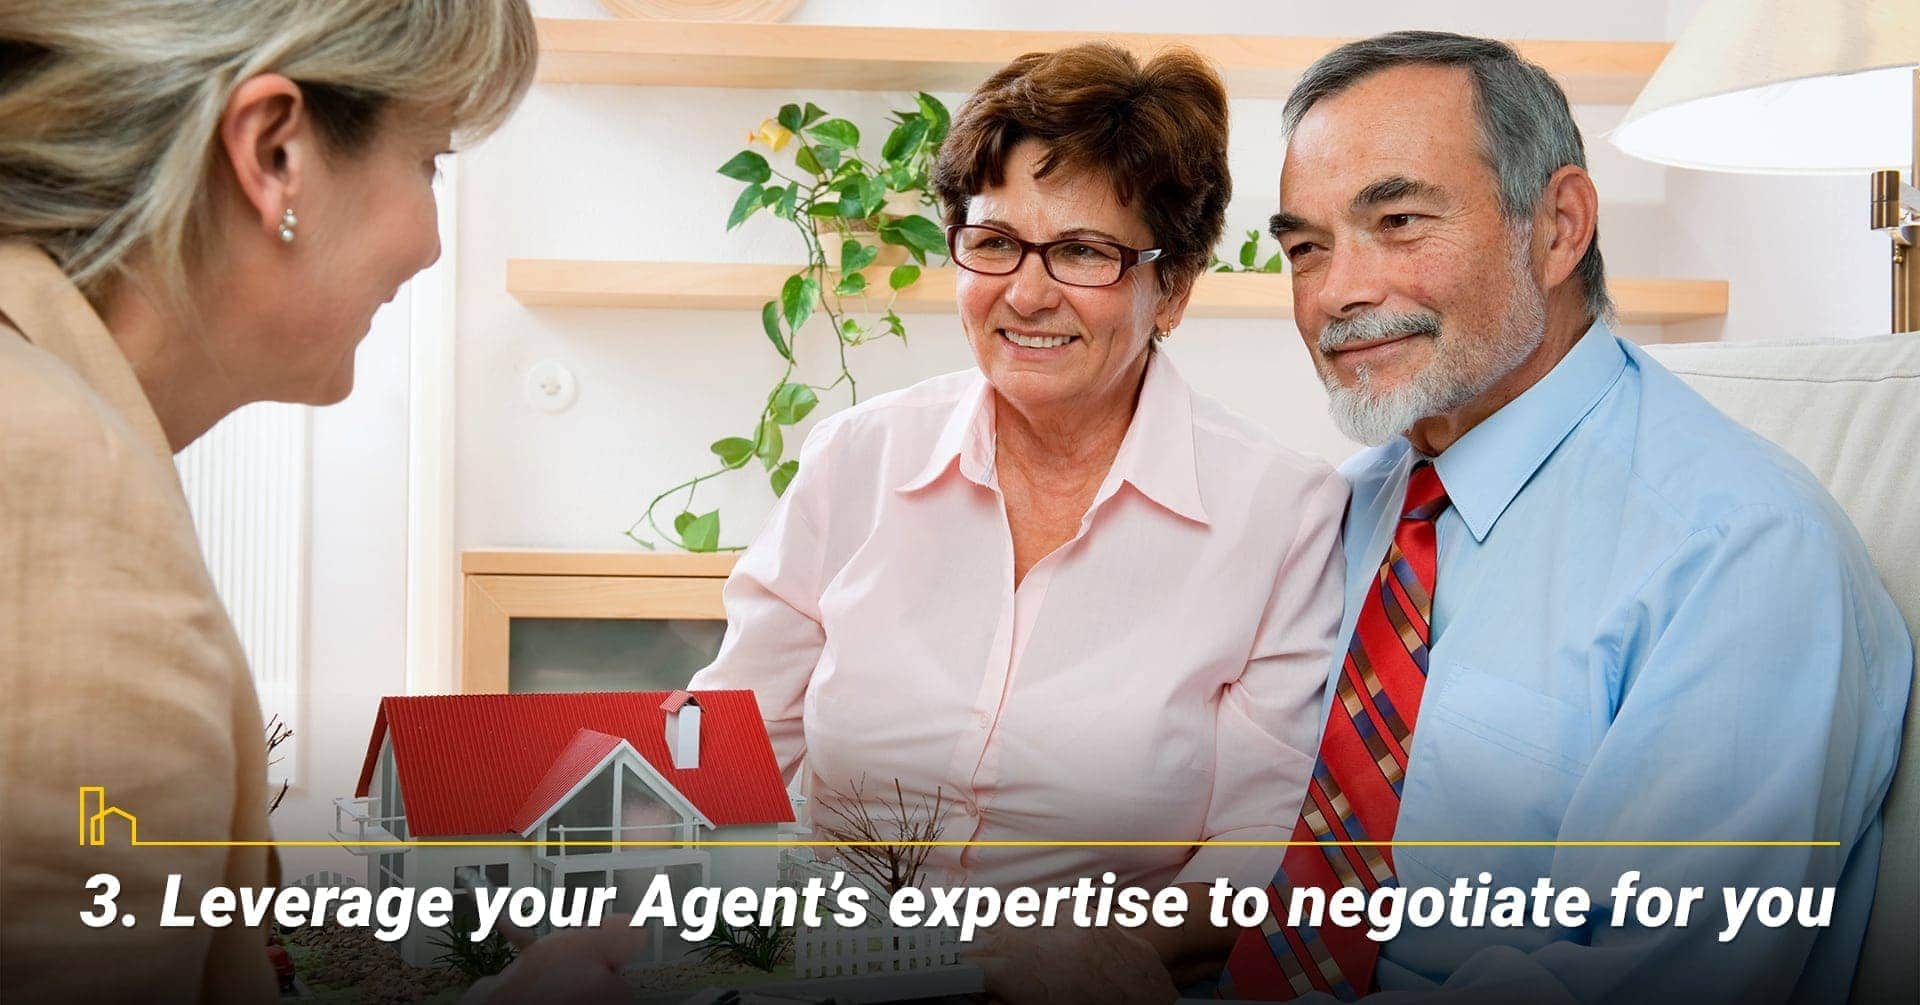 Leverage your Agent's expertise to negotiate for you, get help from your agent for higher price